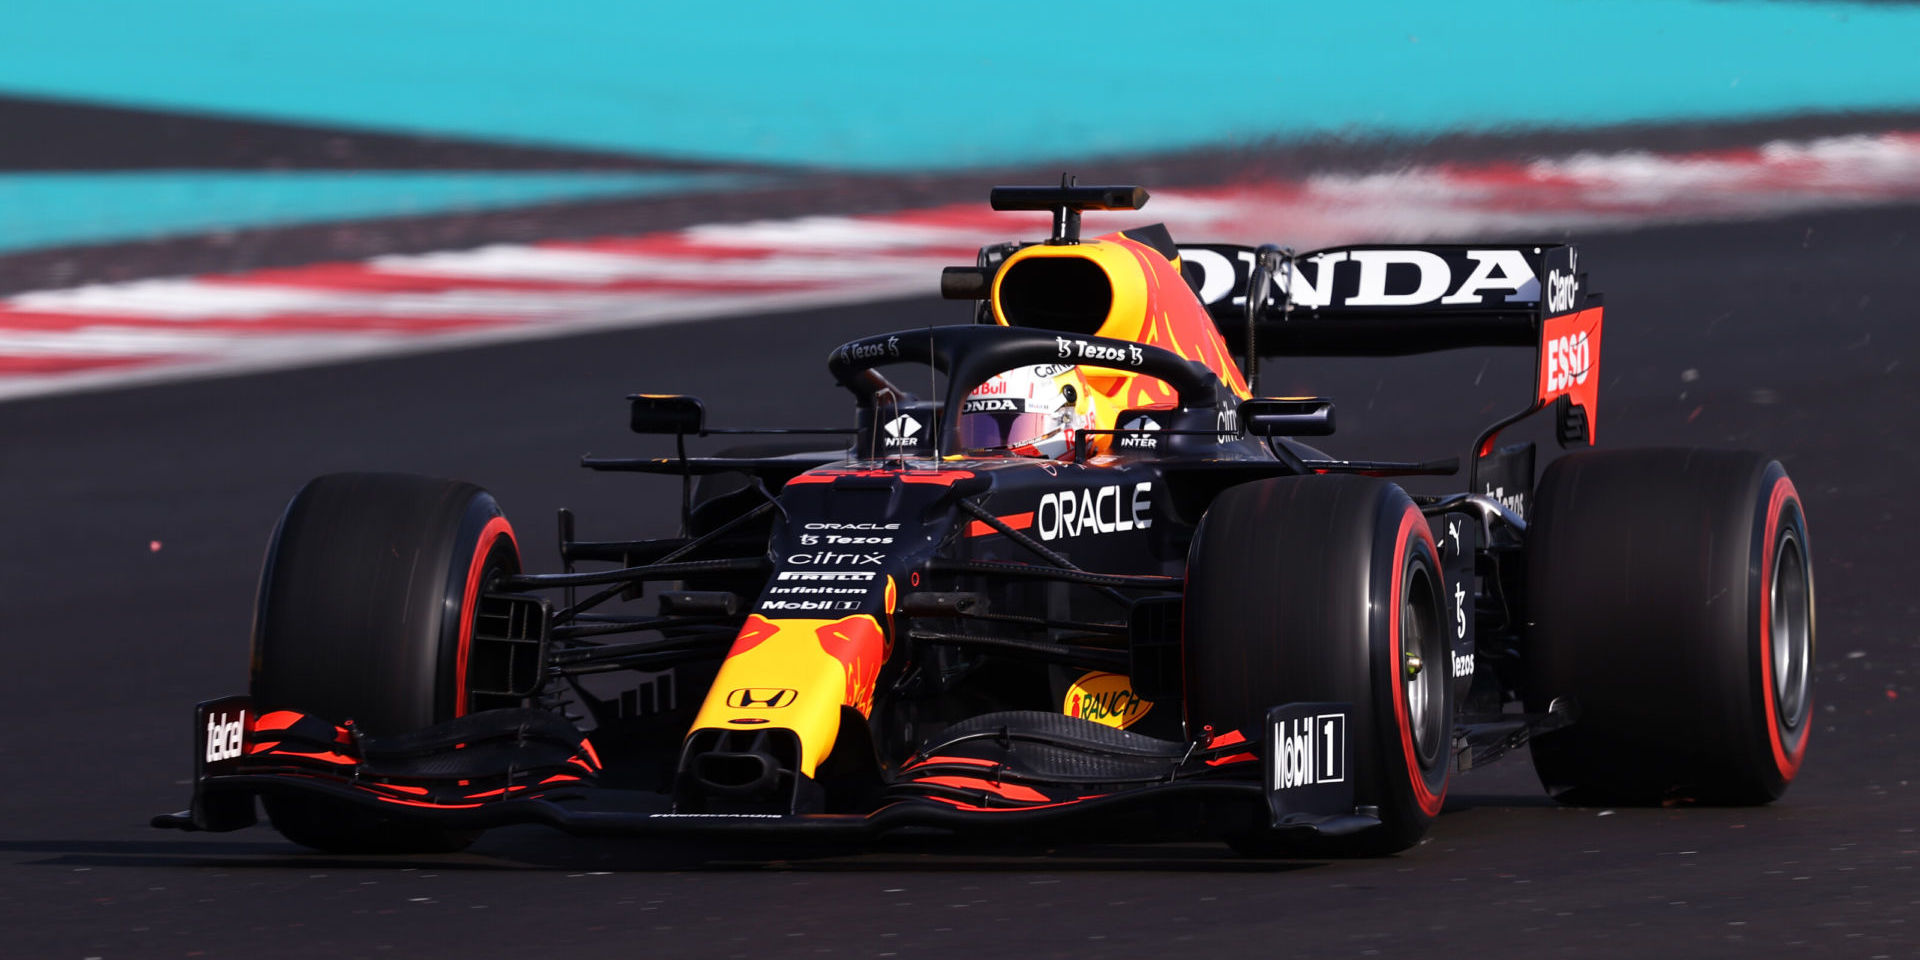 ABU DHABI, UNITED ARAB EMIRATES - DECEMBER 10: Max Verstappen of the Netherlands driving the (33) Red Bull Racing RB16B Honda during practice ahead of the F1 Grand Prix of Abu Dhabi at Yas Marina Circuit on December 10, 2021 in Abu Dhabi, United Arab Emirates. (Photo by Lars Baron/Getty Images) // Getty Images / Red Bull Content Pool // SI202112100269 // Usage for editorial use only //